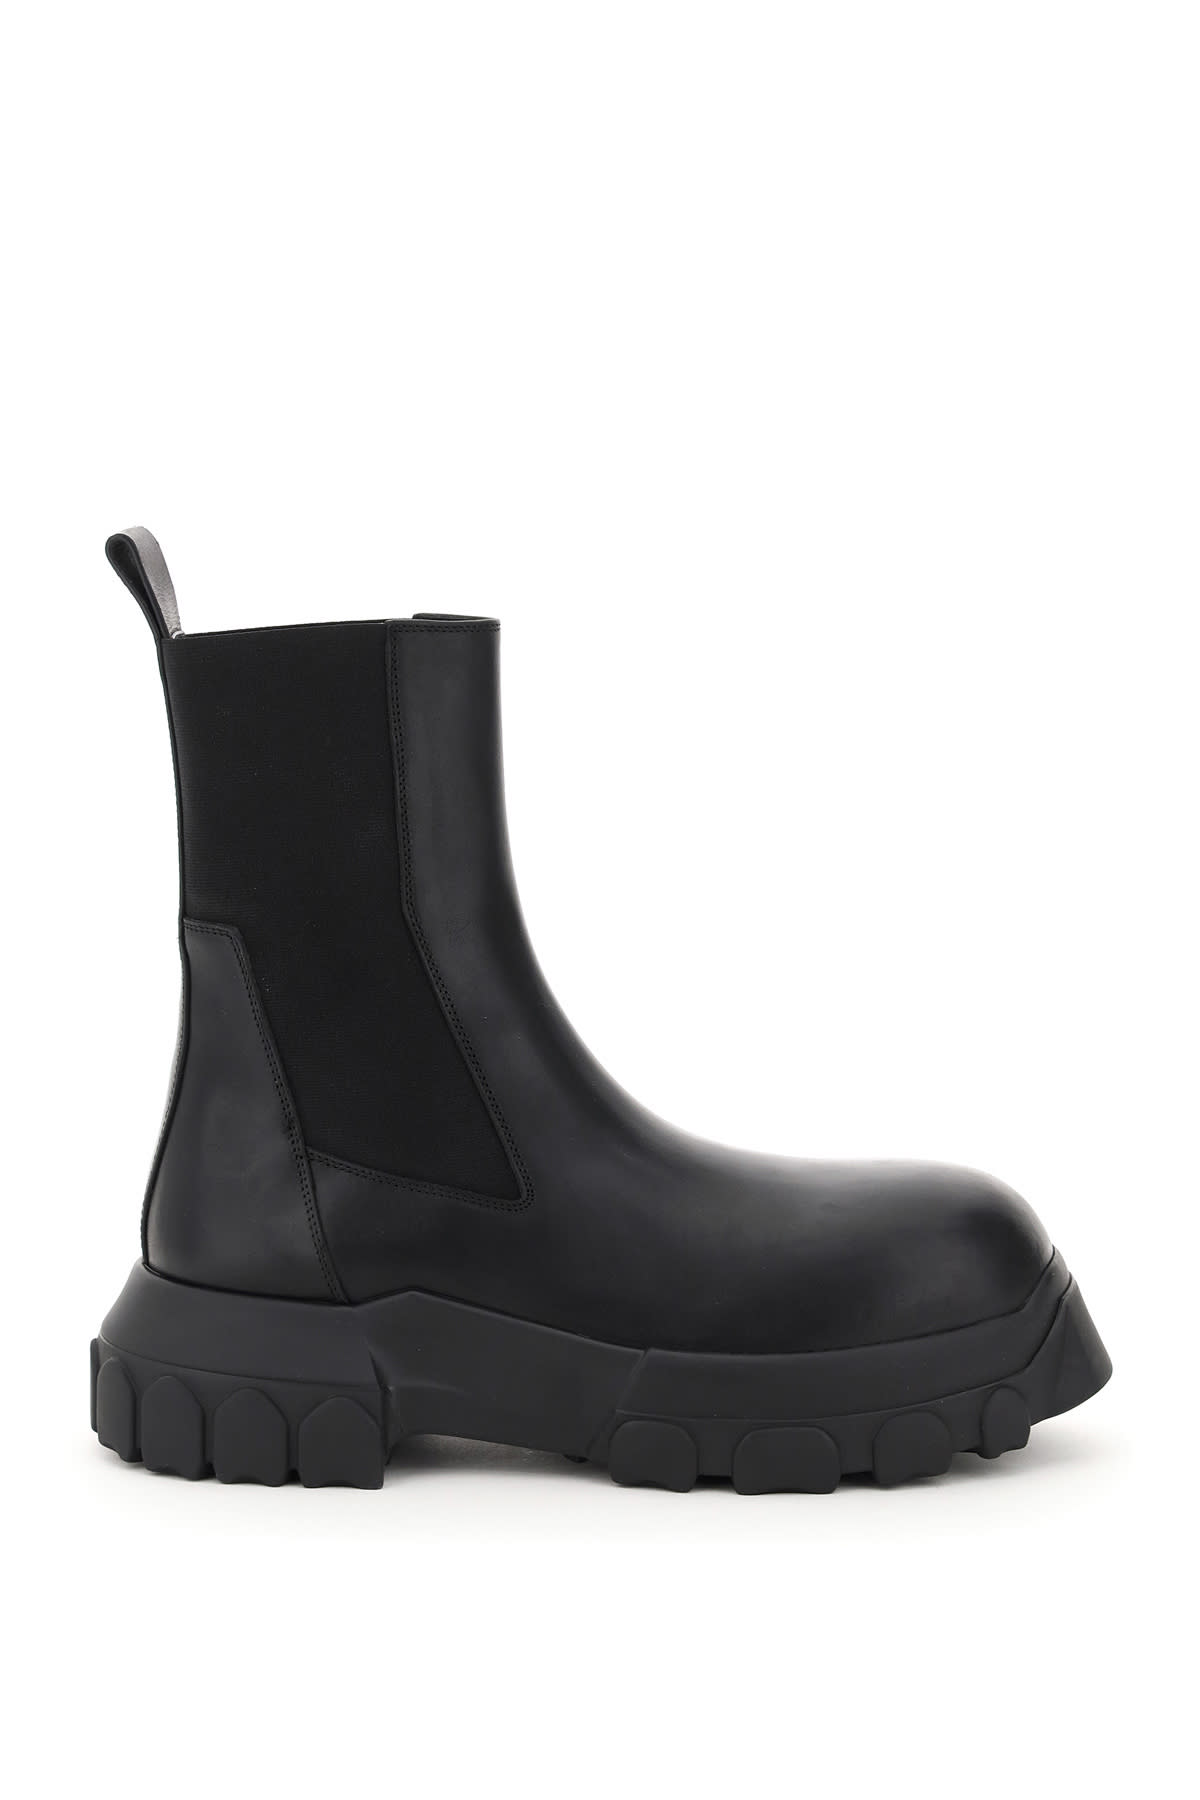 Rick Owens Bozo Tractor Beatle Boots